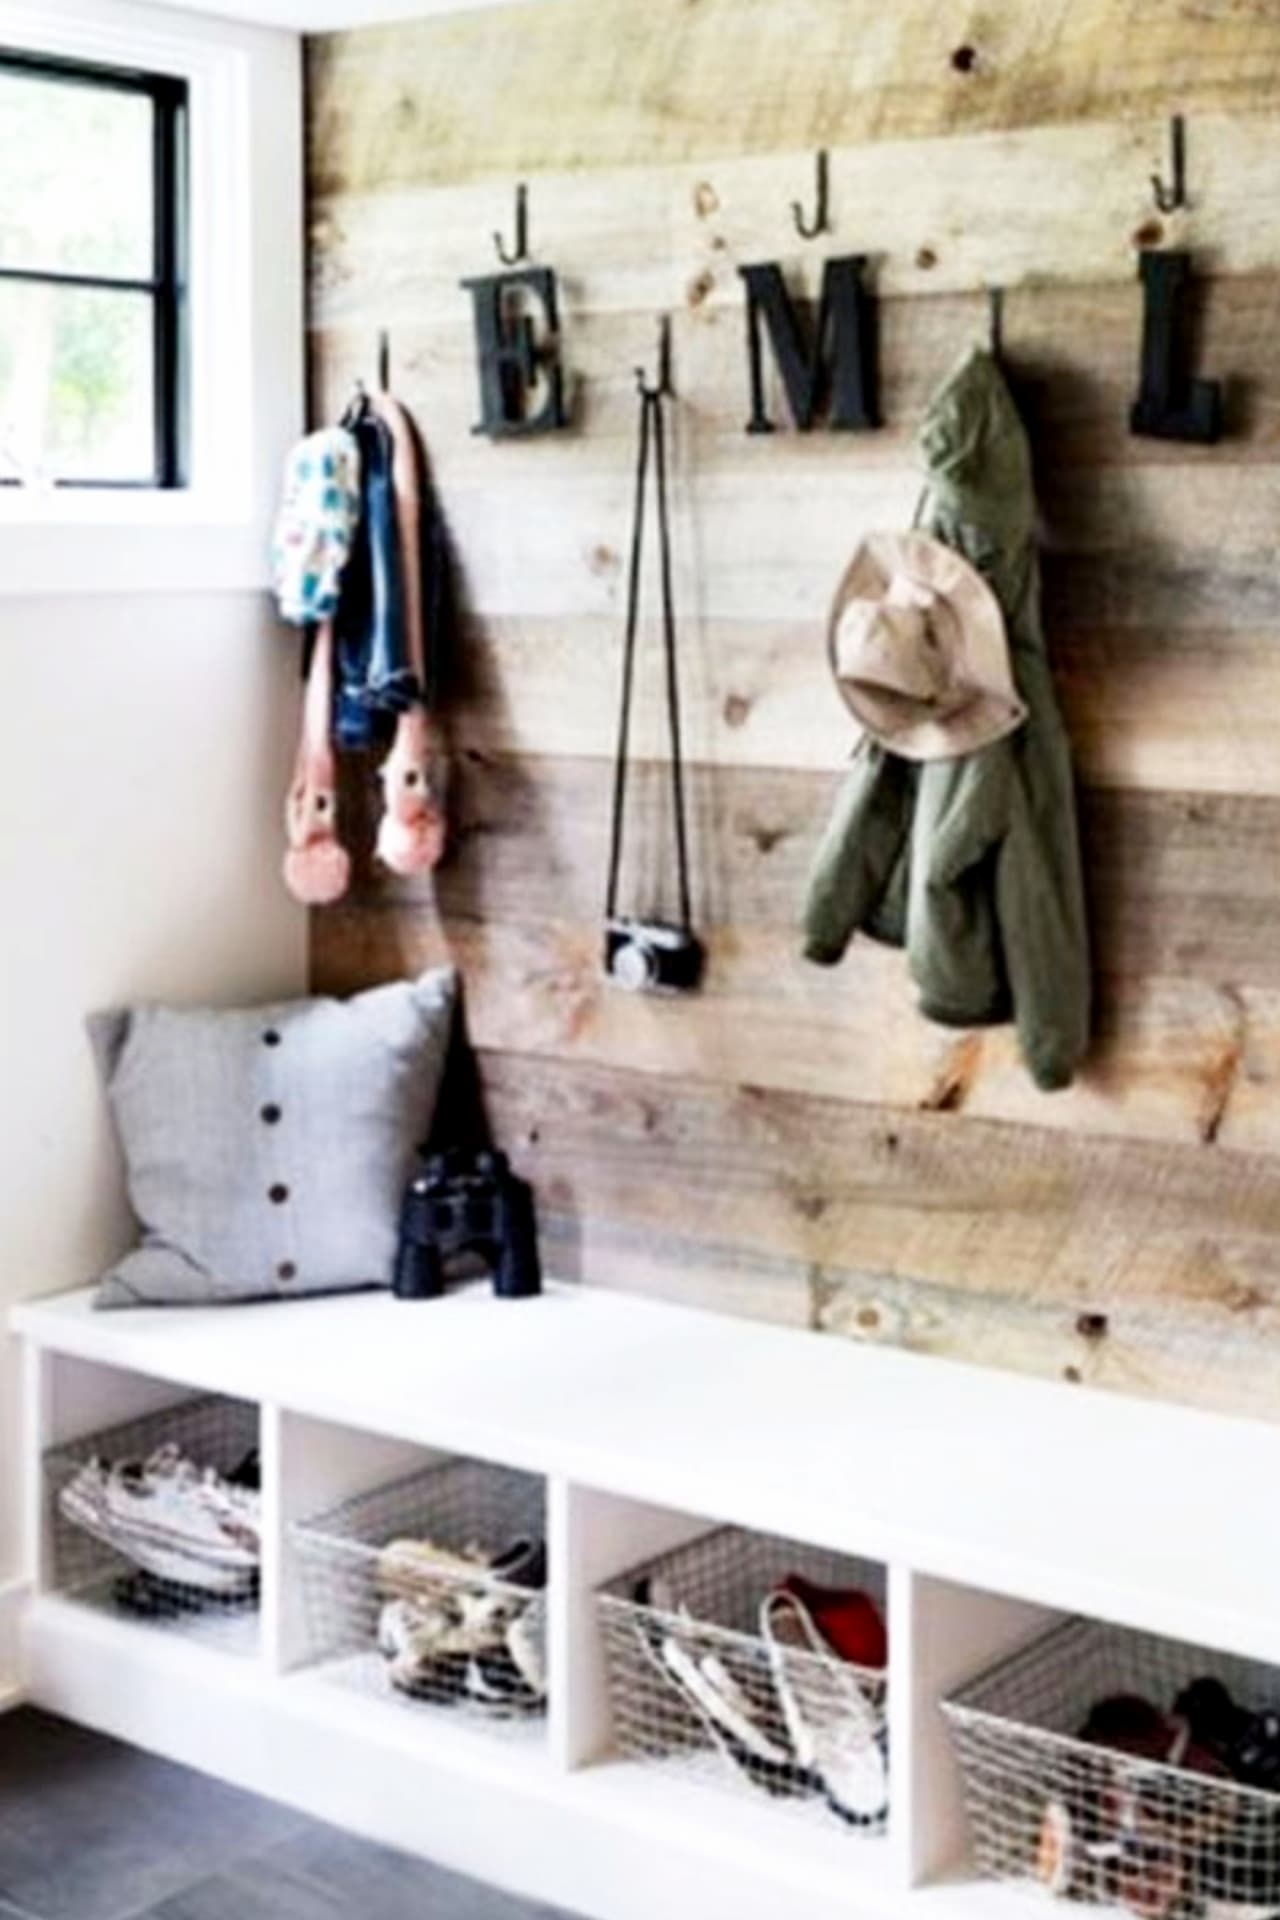 MudRoom Ideas Entryway Mudroom ideas. Laundry mudroom ideas, entryway mudroom ideas and mud room storage ideas - Get organized at home with a mudroom bench, cubbies and mudroom storage area. Farmhouse mudroom ideas as well as rustic and modern farmhouse decorating ideas too.